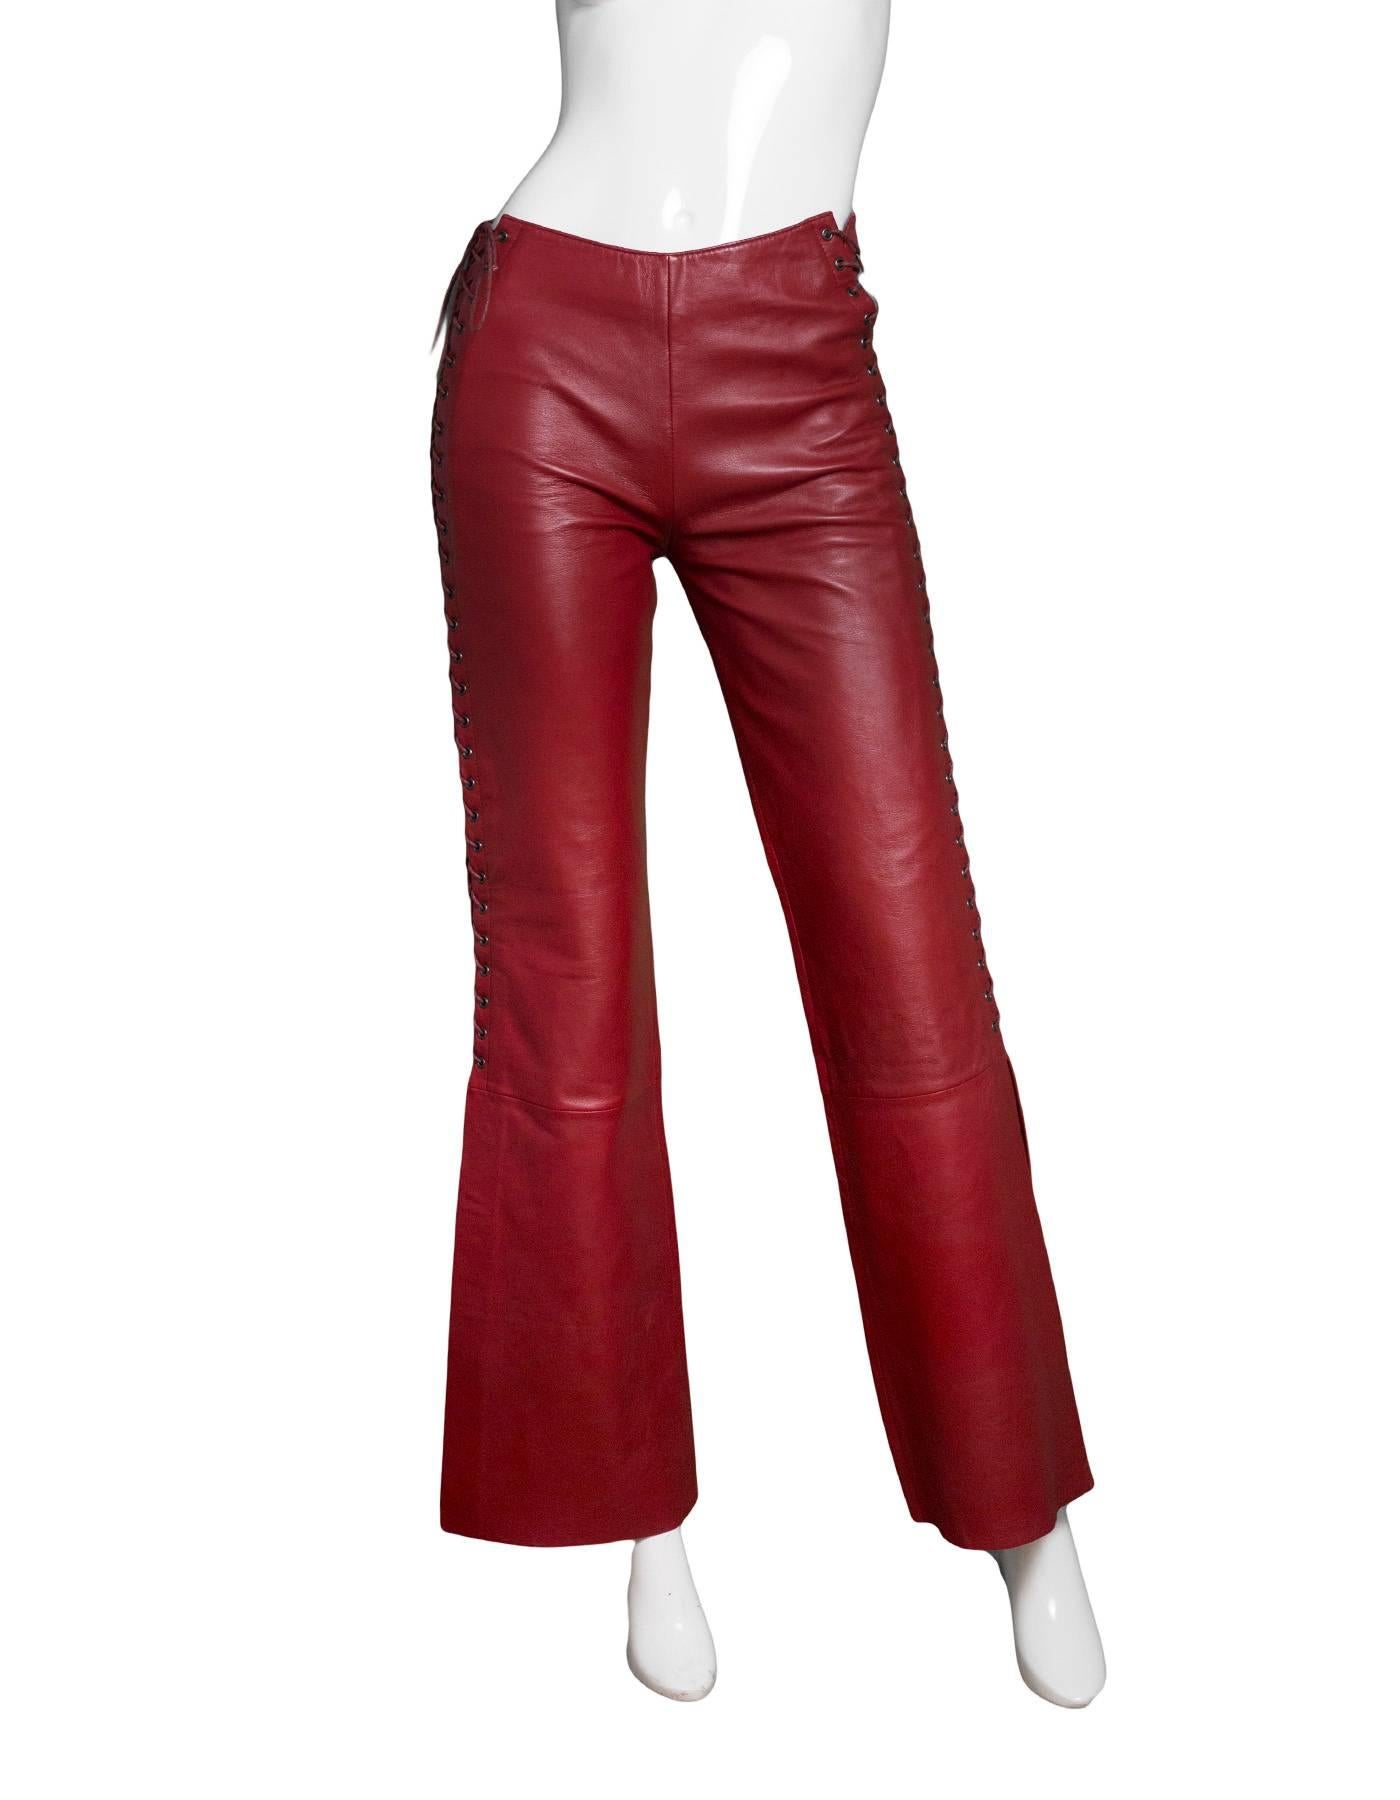 red leather bell bottom pants